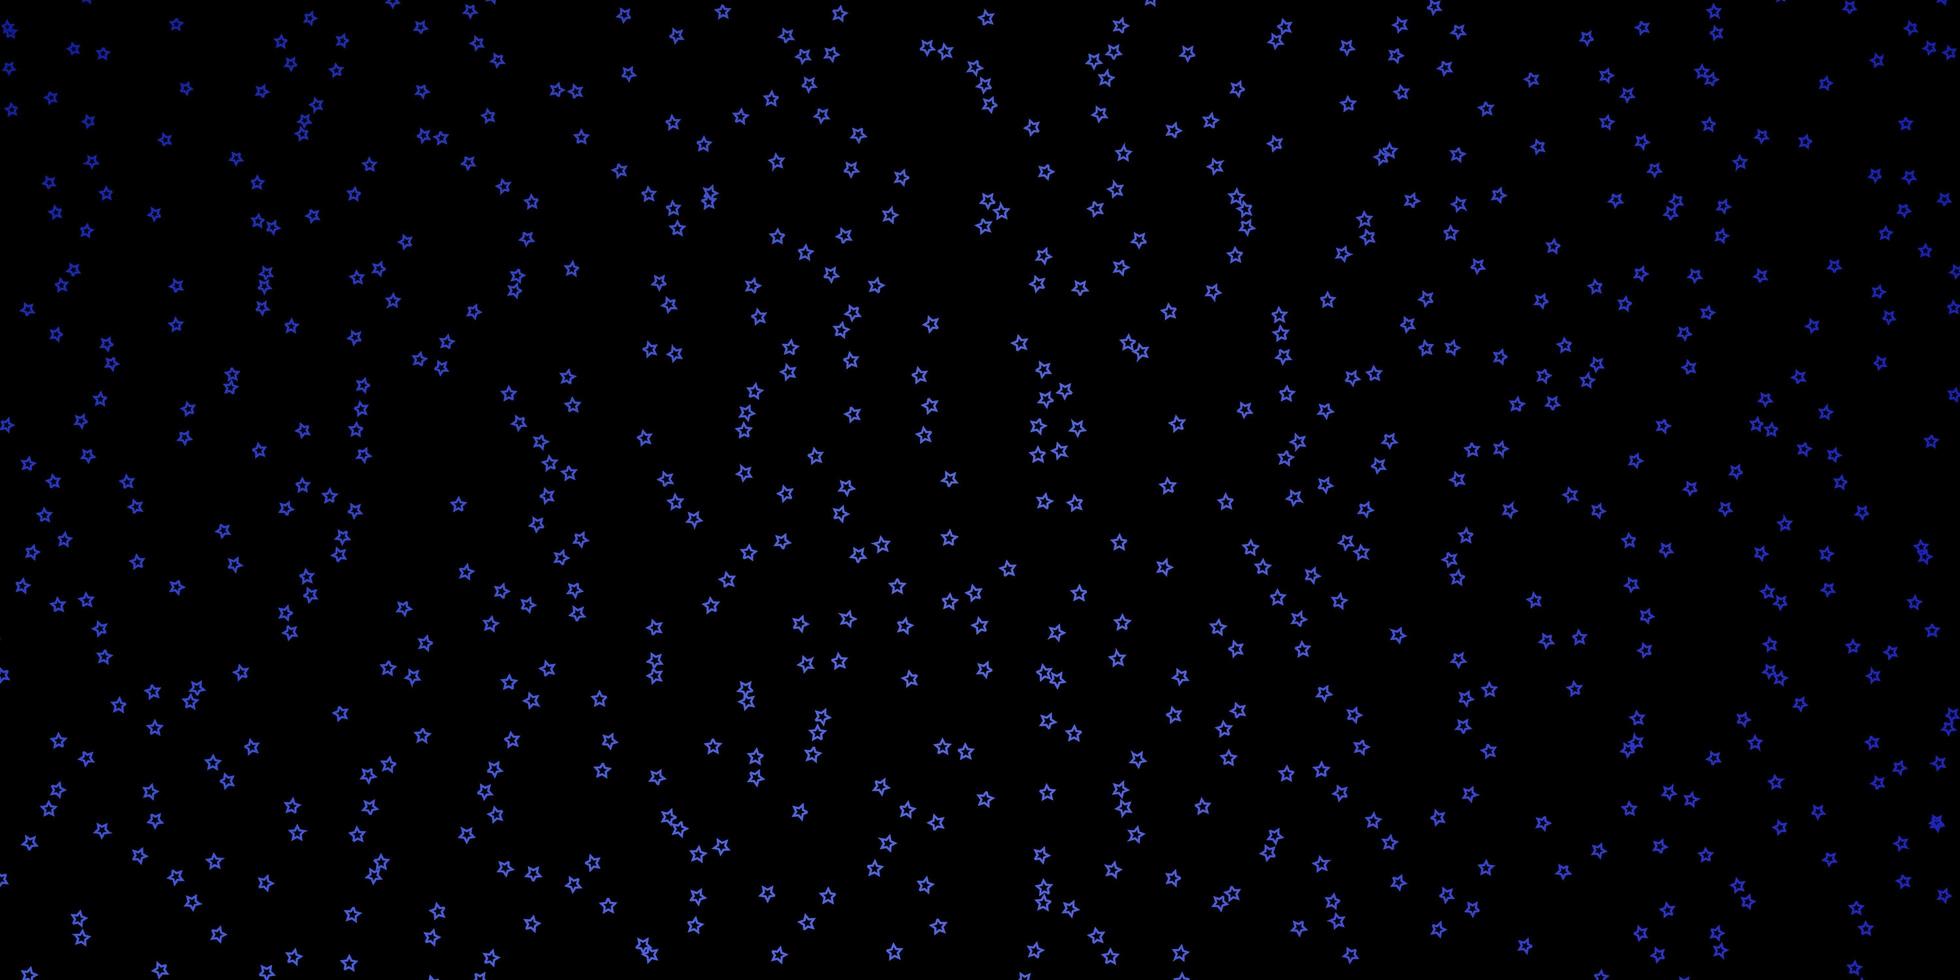 Dark BLUE vector background with colorful stars.